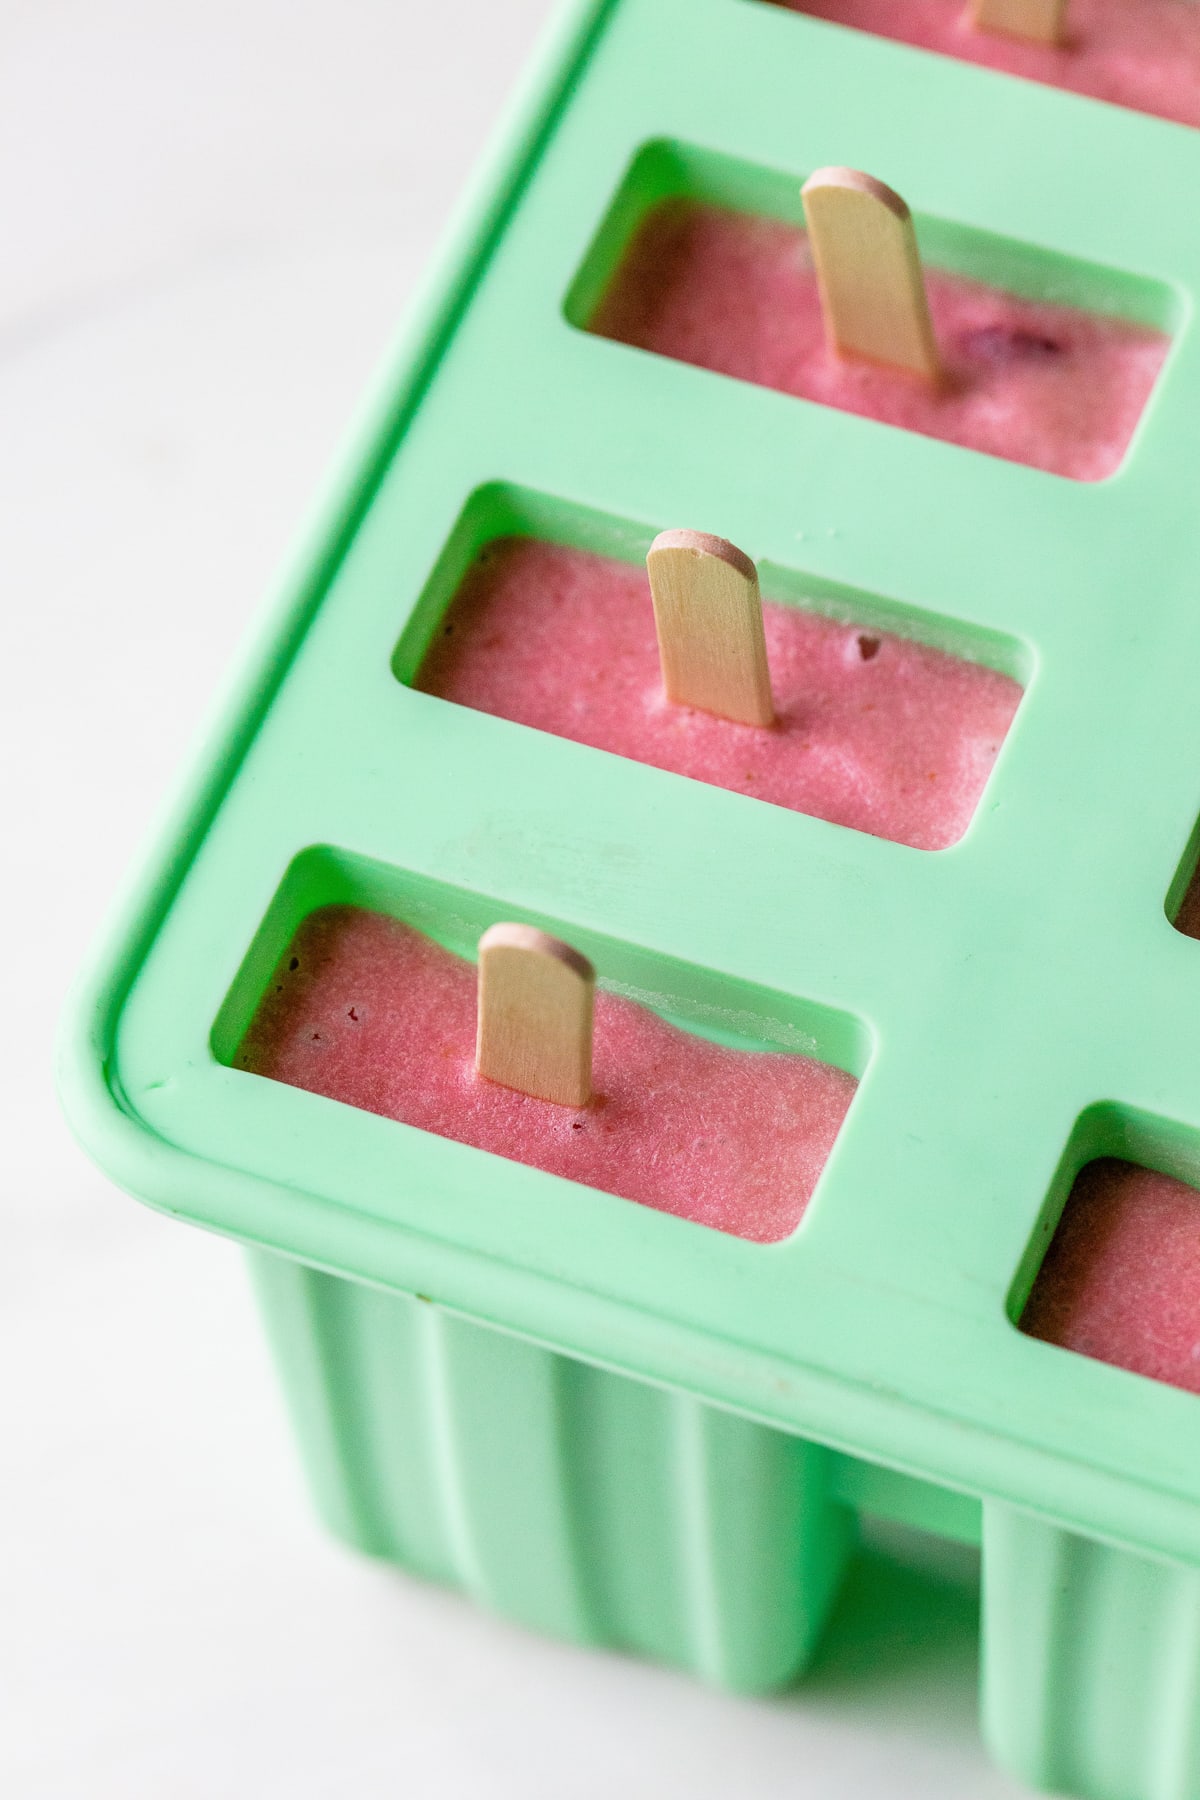 Paletas in a popsicle mold.